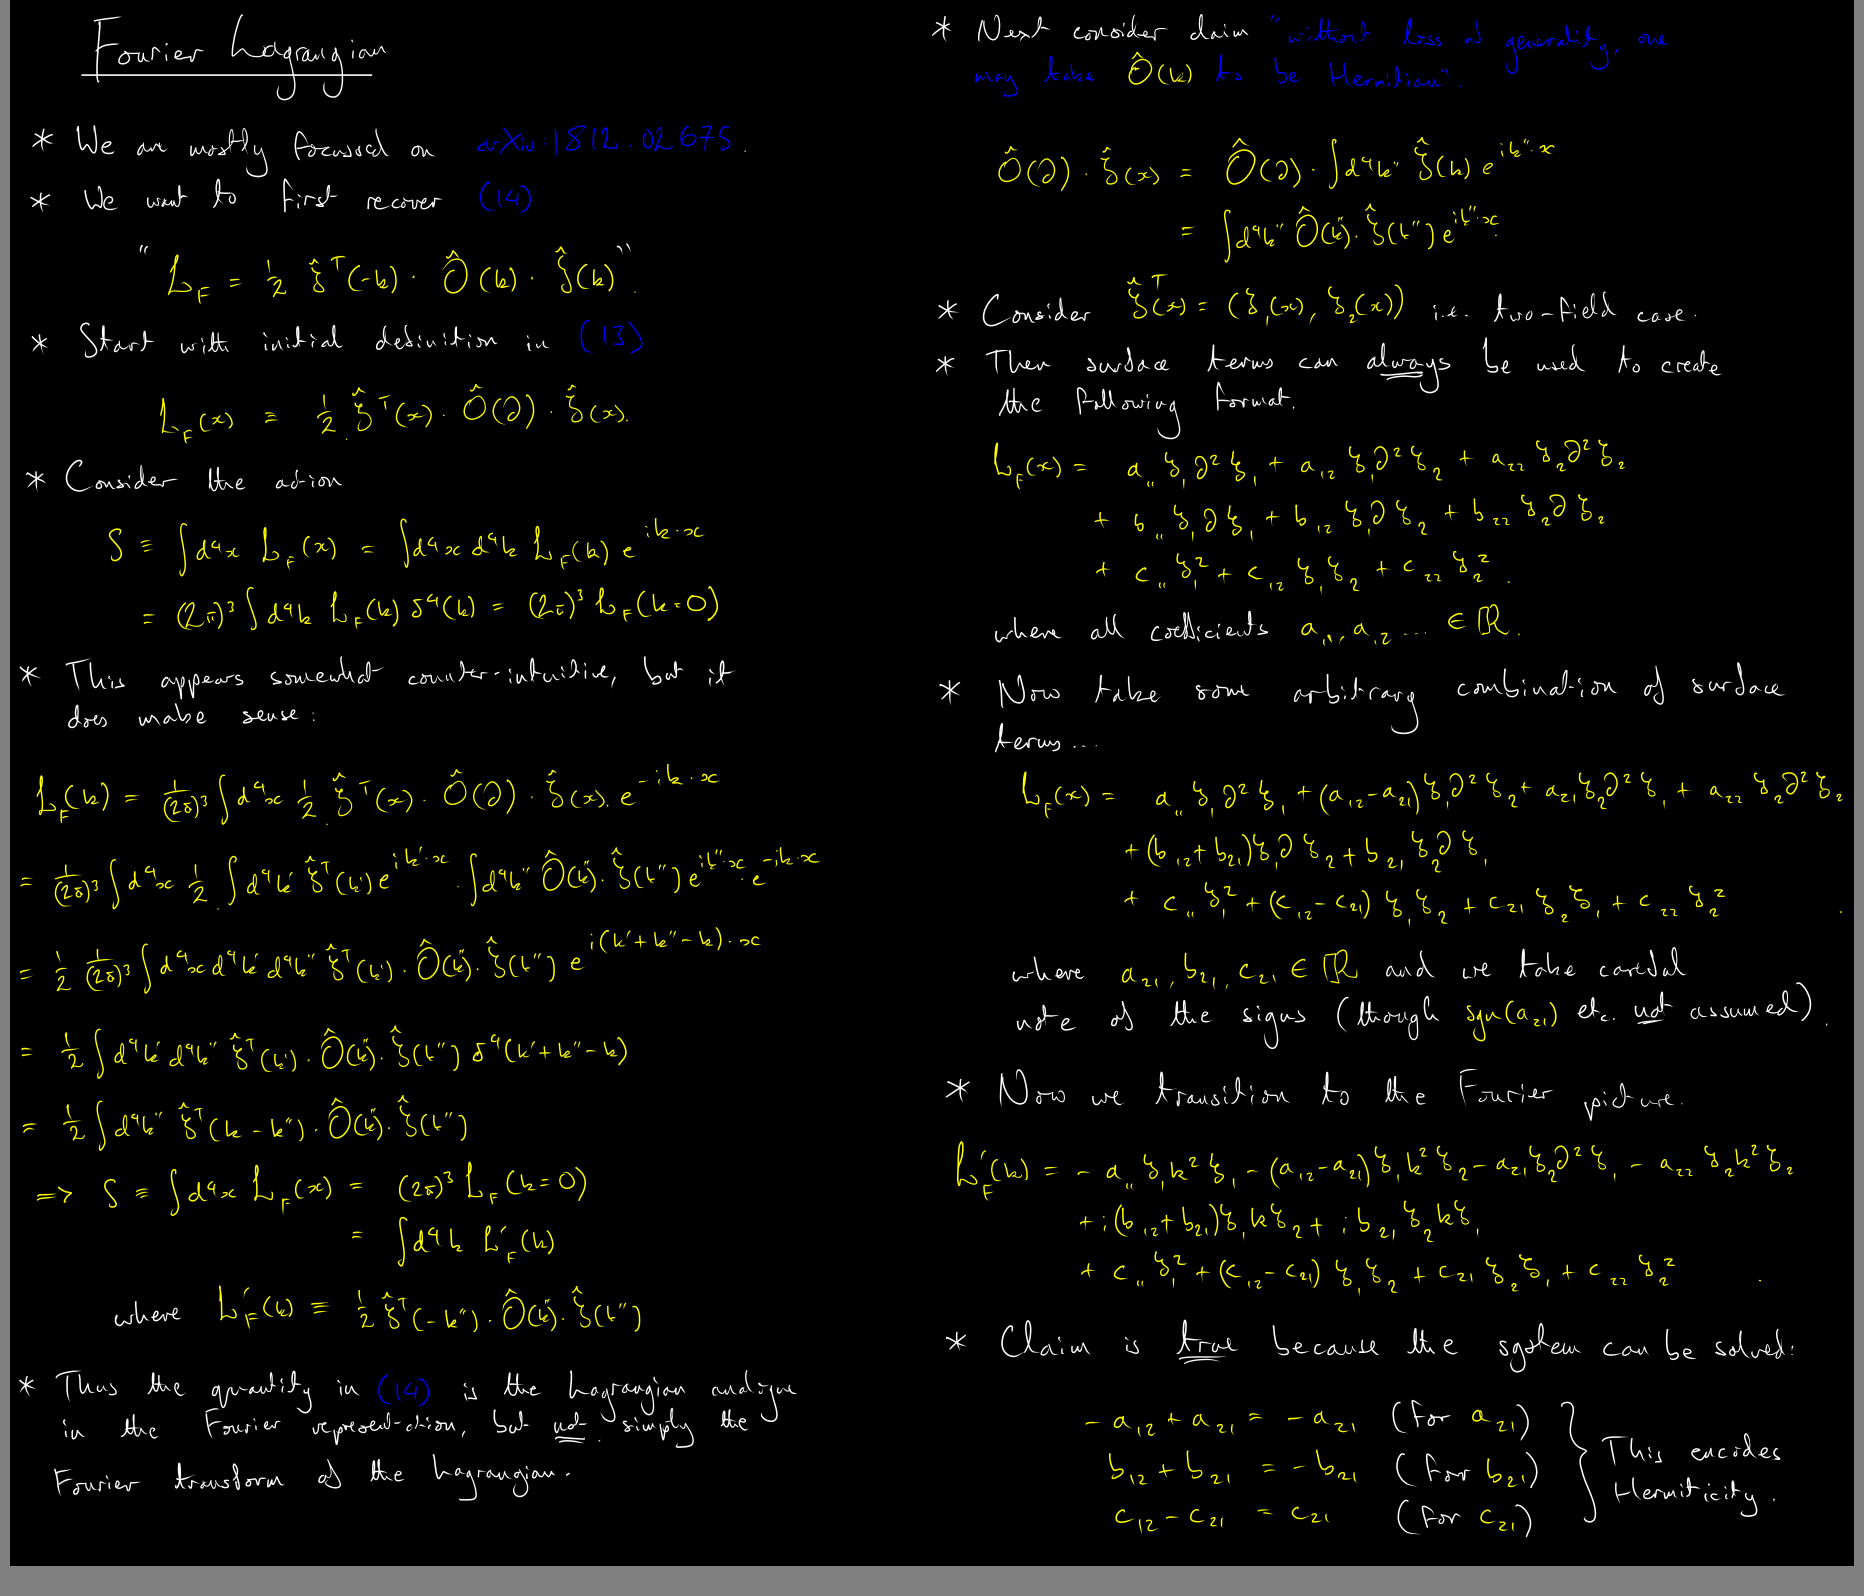 Supervision notes on the origin of the minus sign in the momentum-space Lagrangian.